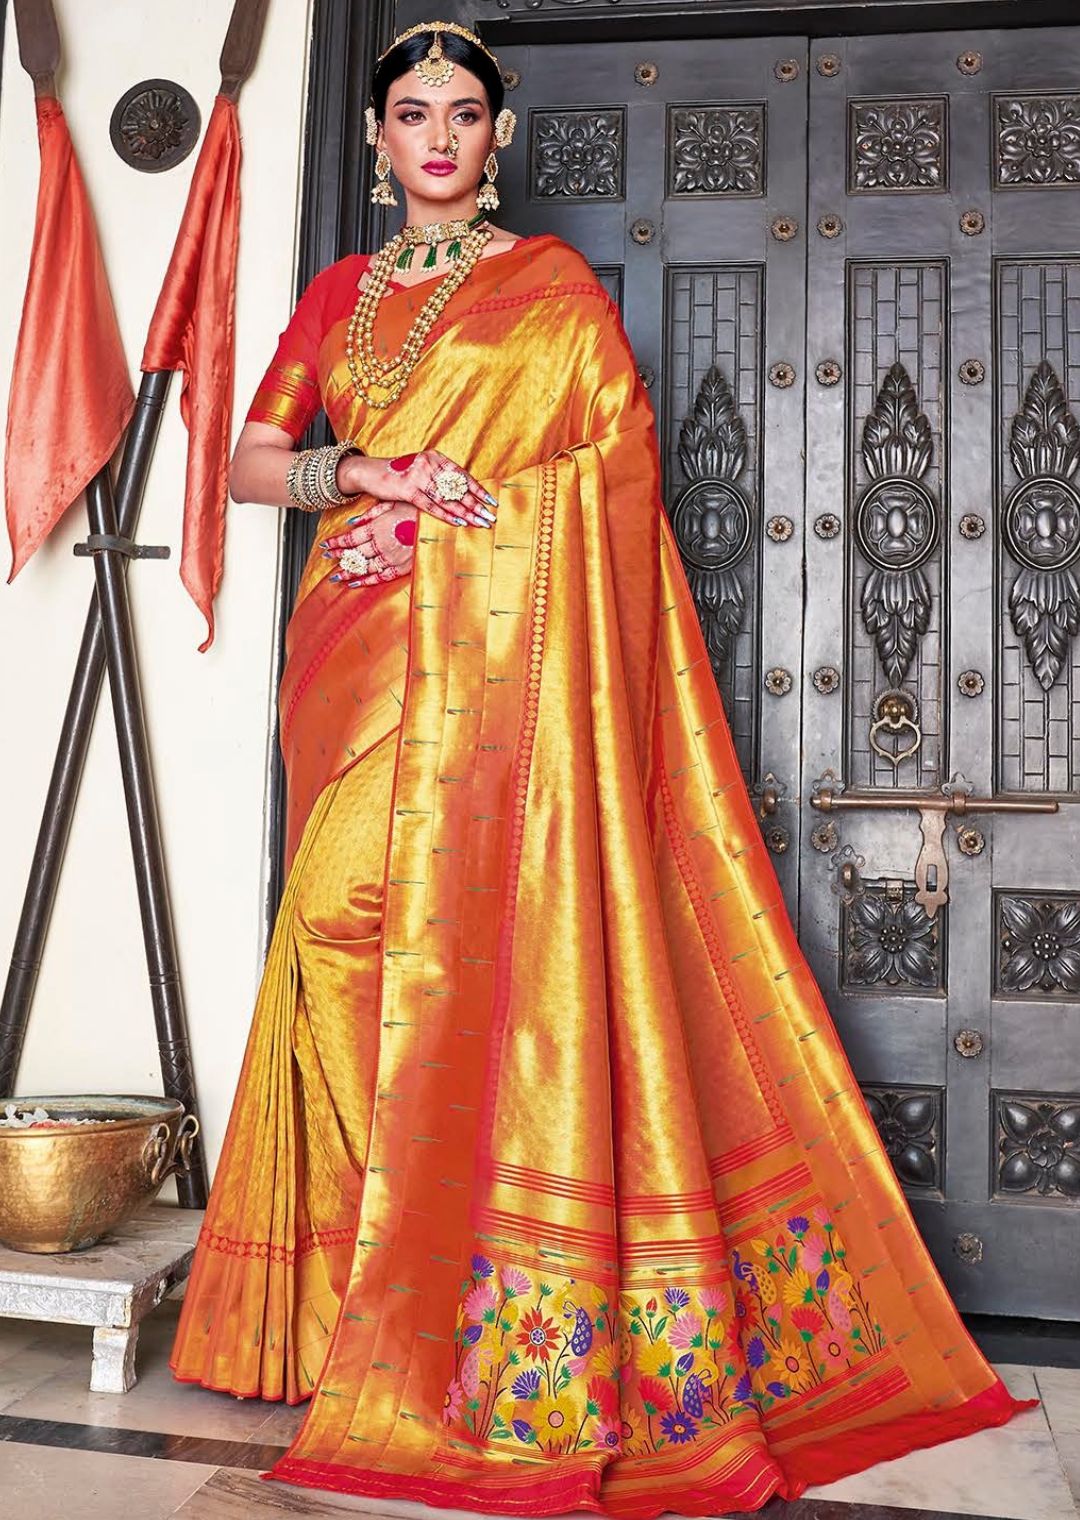 Red Pure Silk Saree With Golden Border And Red Colored Blouse | Cash On  Delivery Available, Throughout India